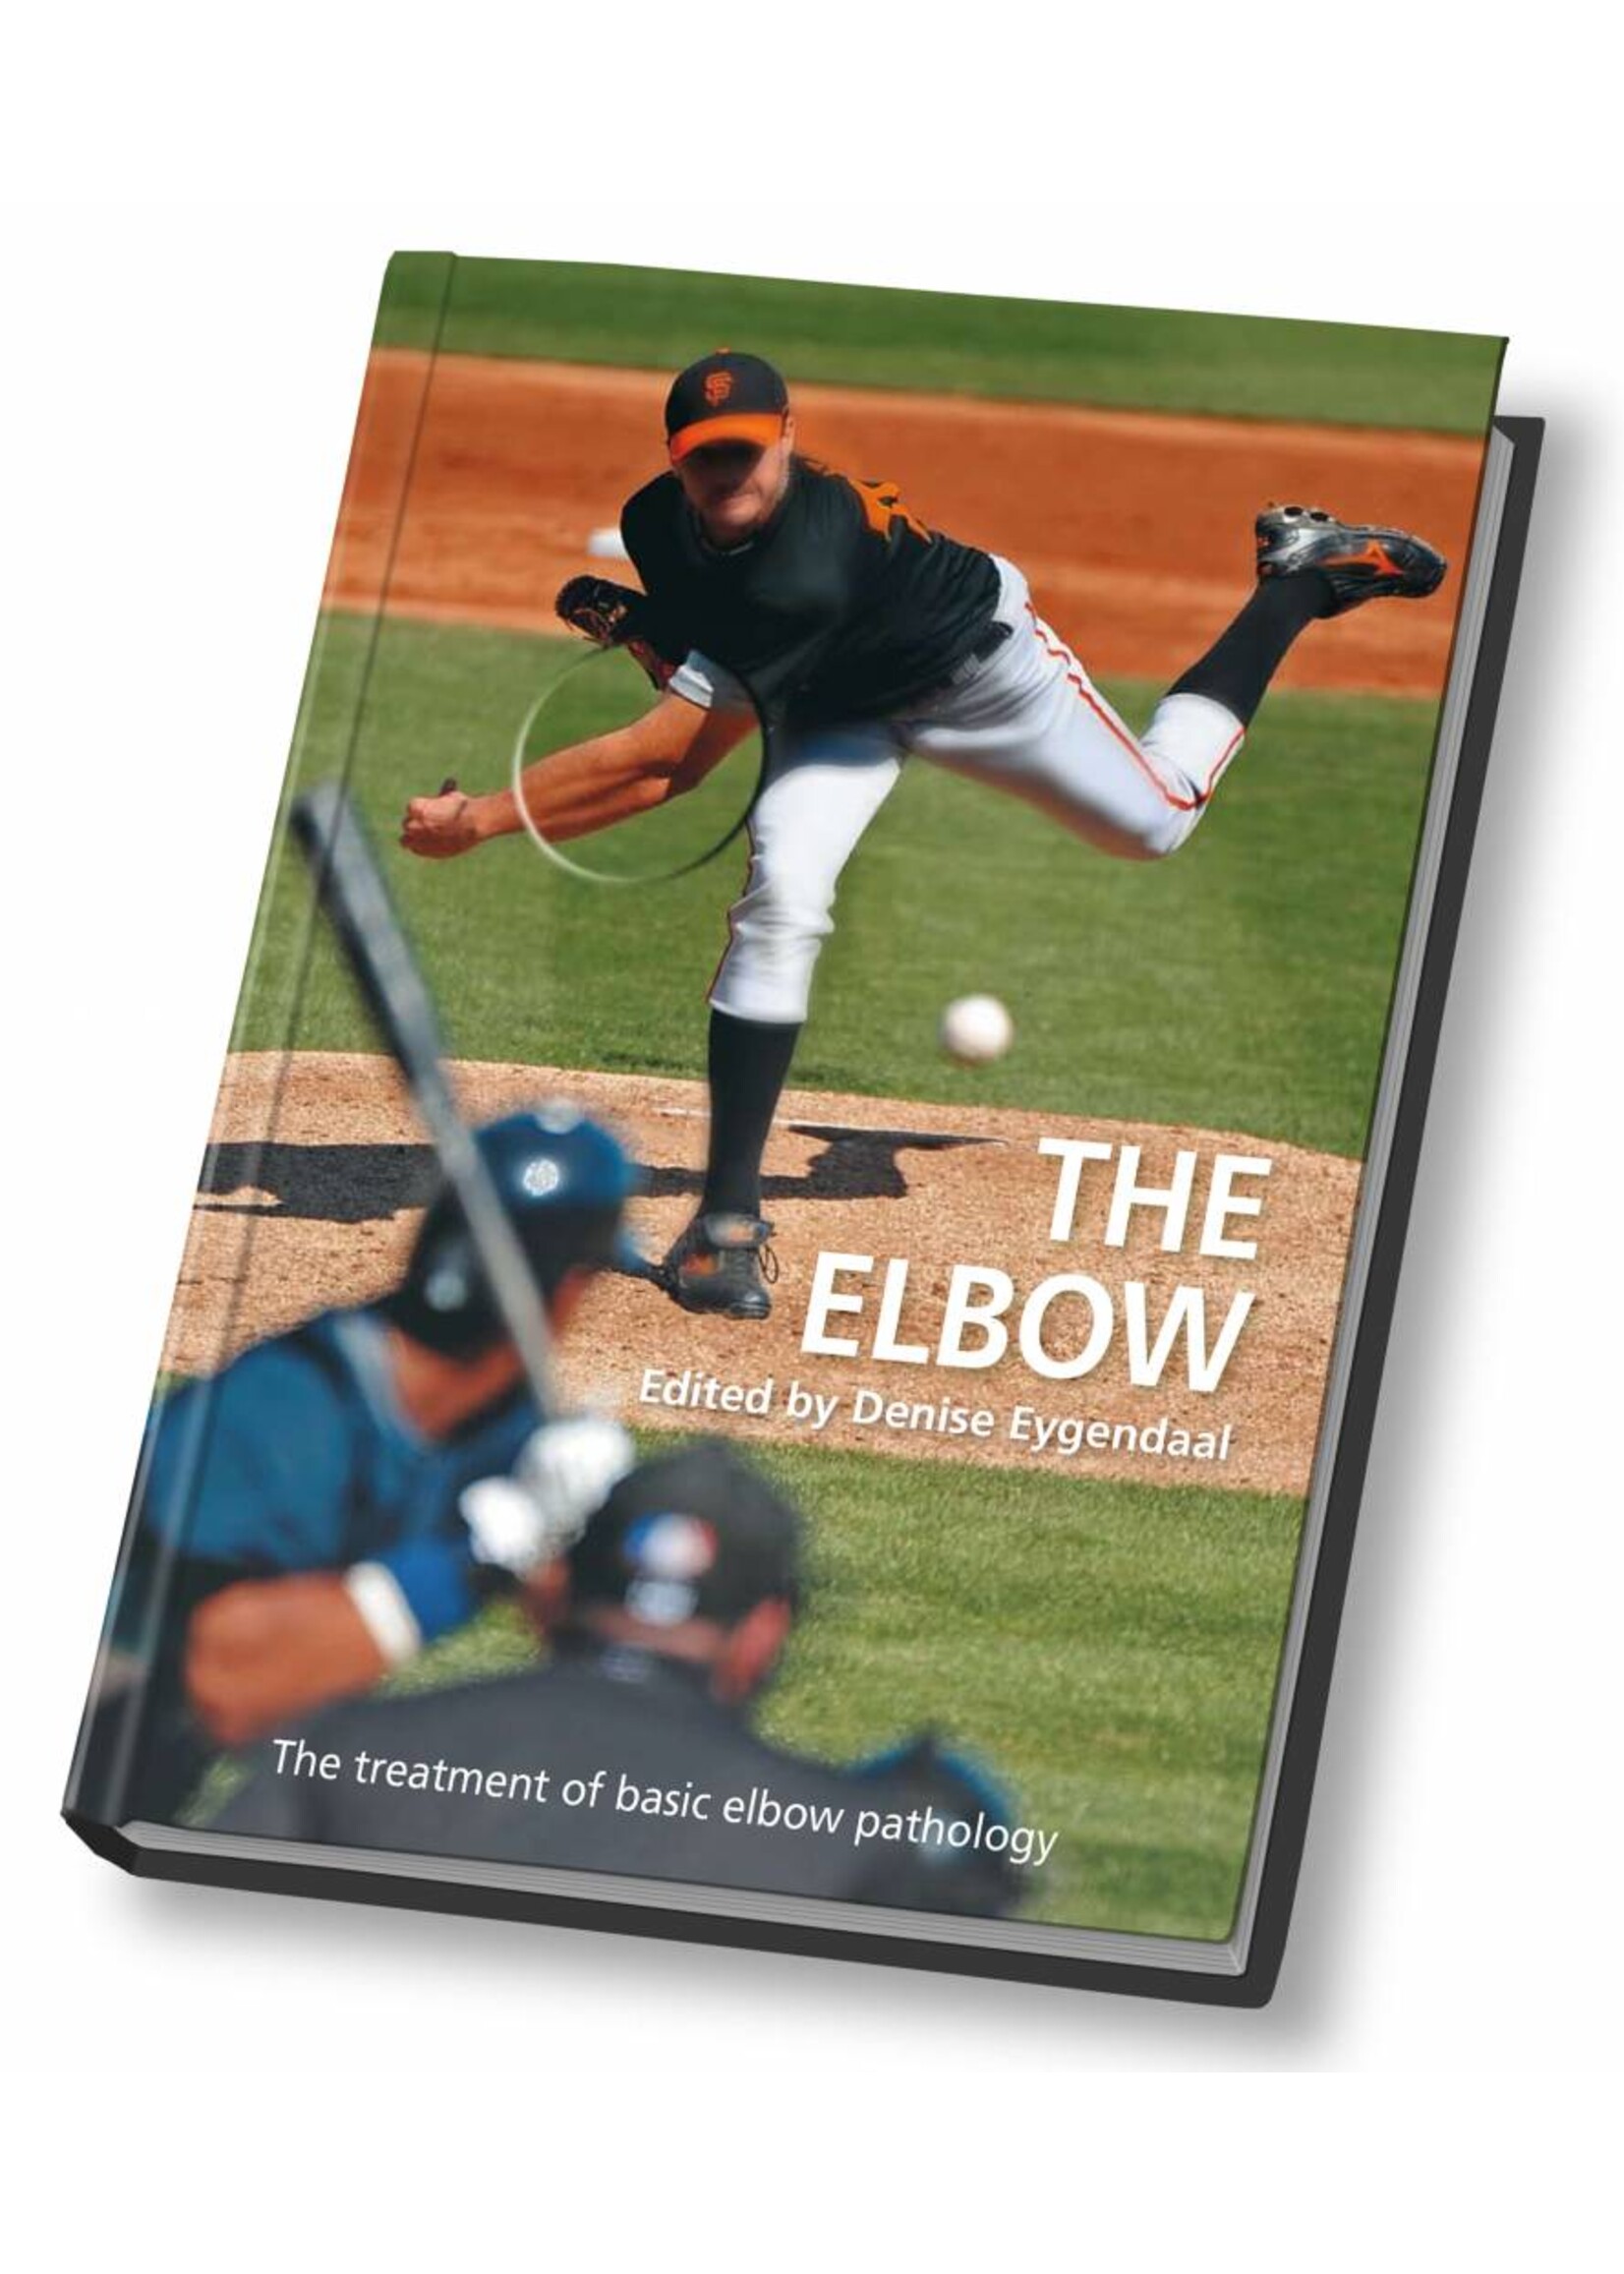 The elbow